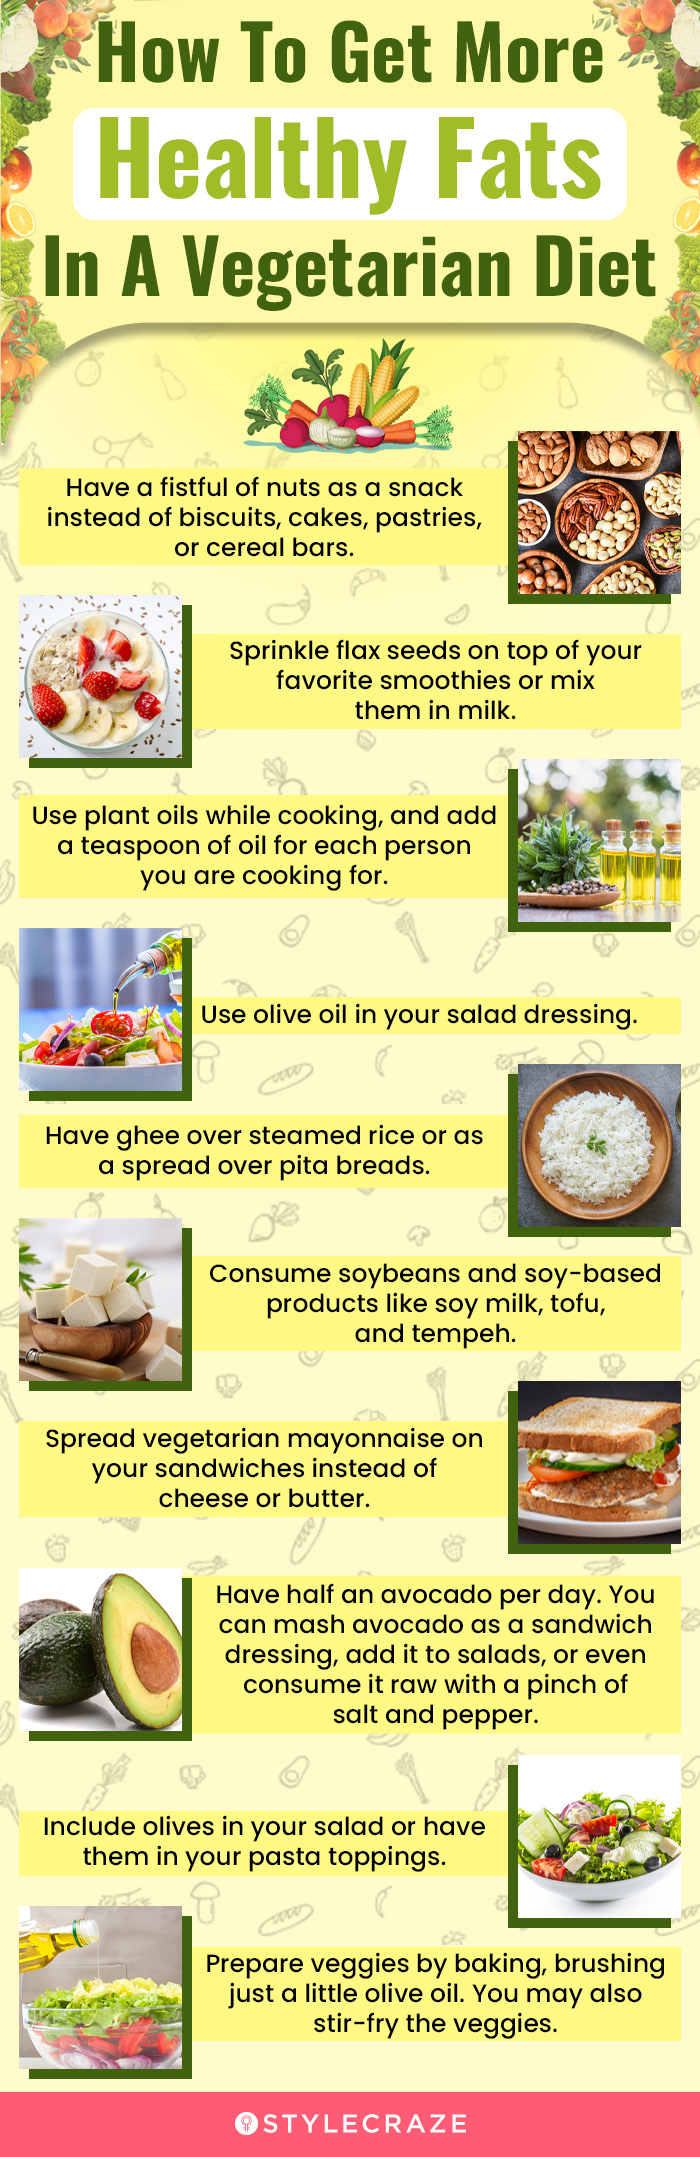 how to get more healthy fats in a vegetarian diet (infographic)